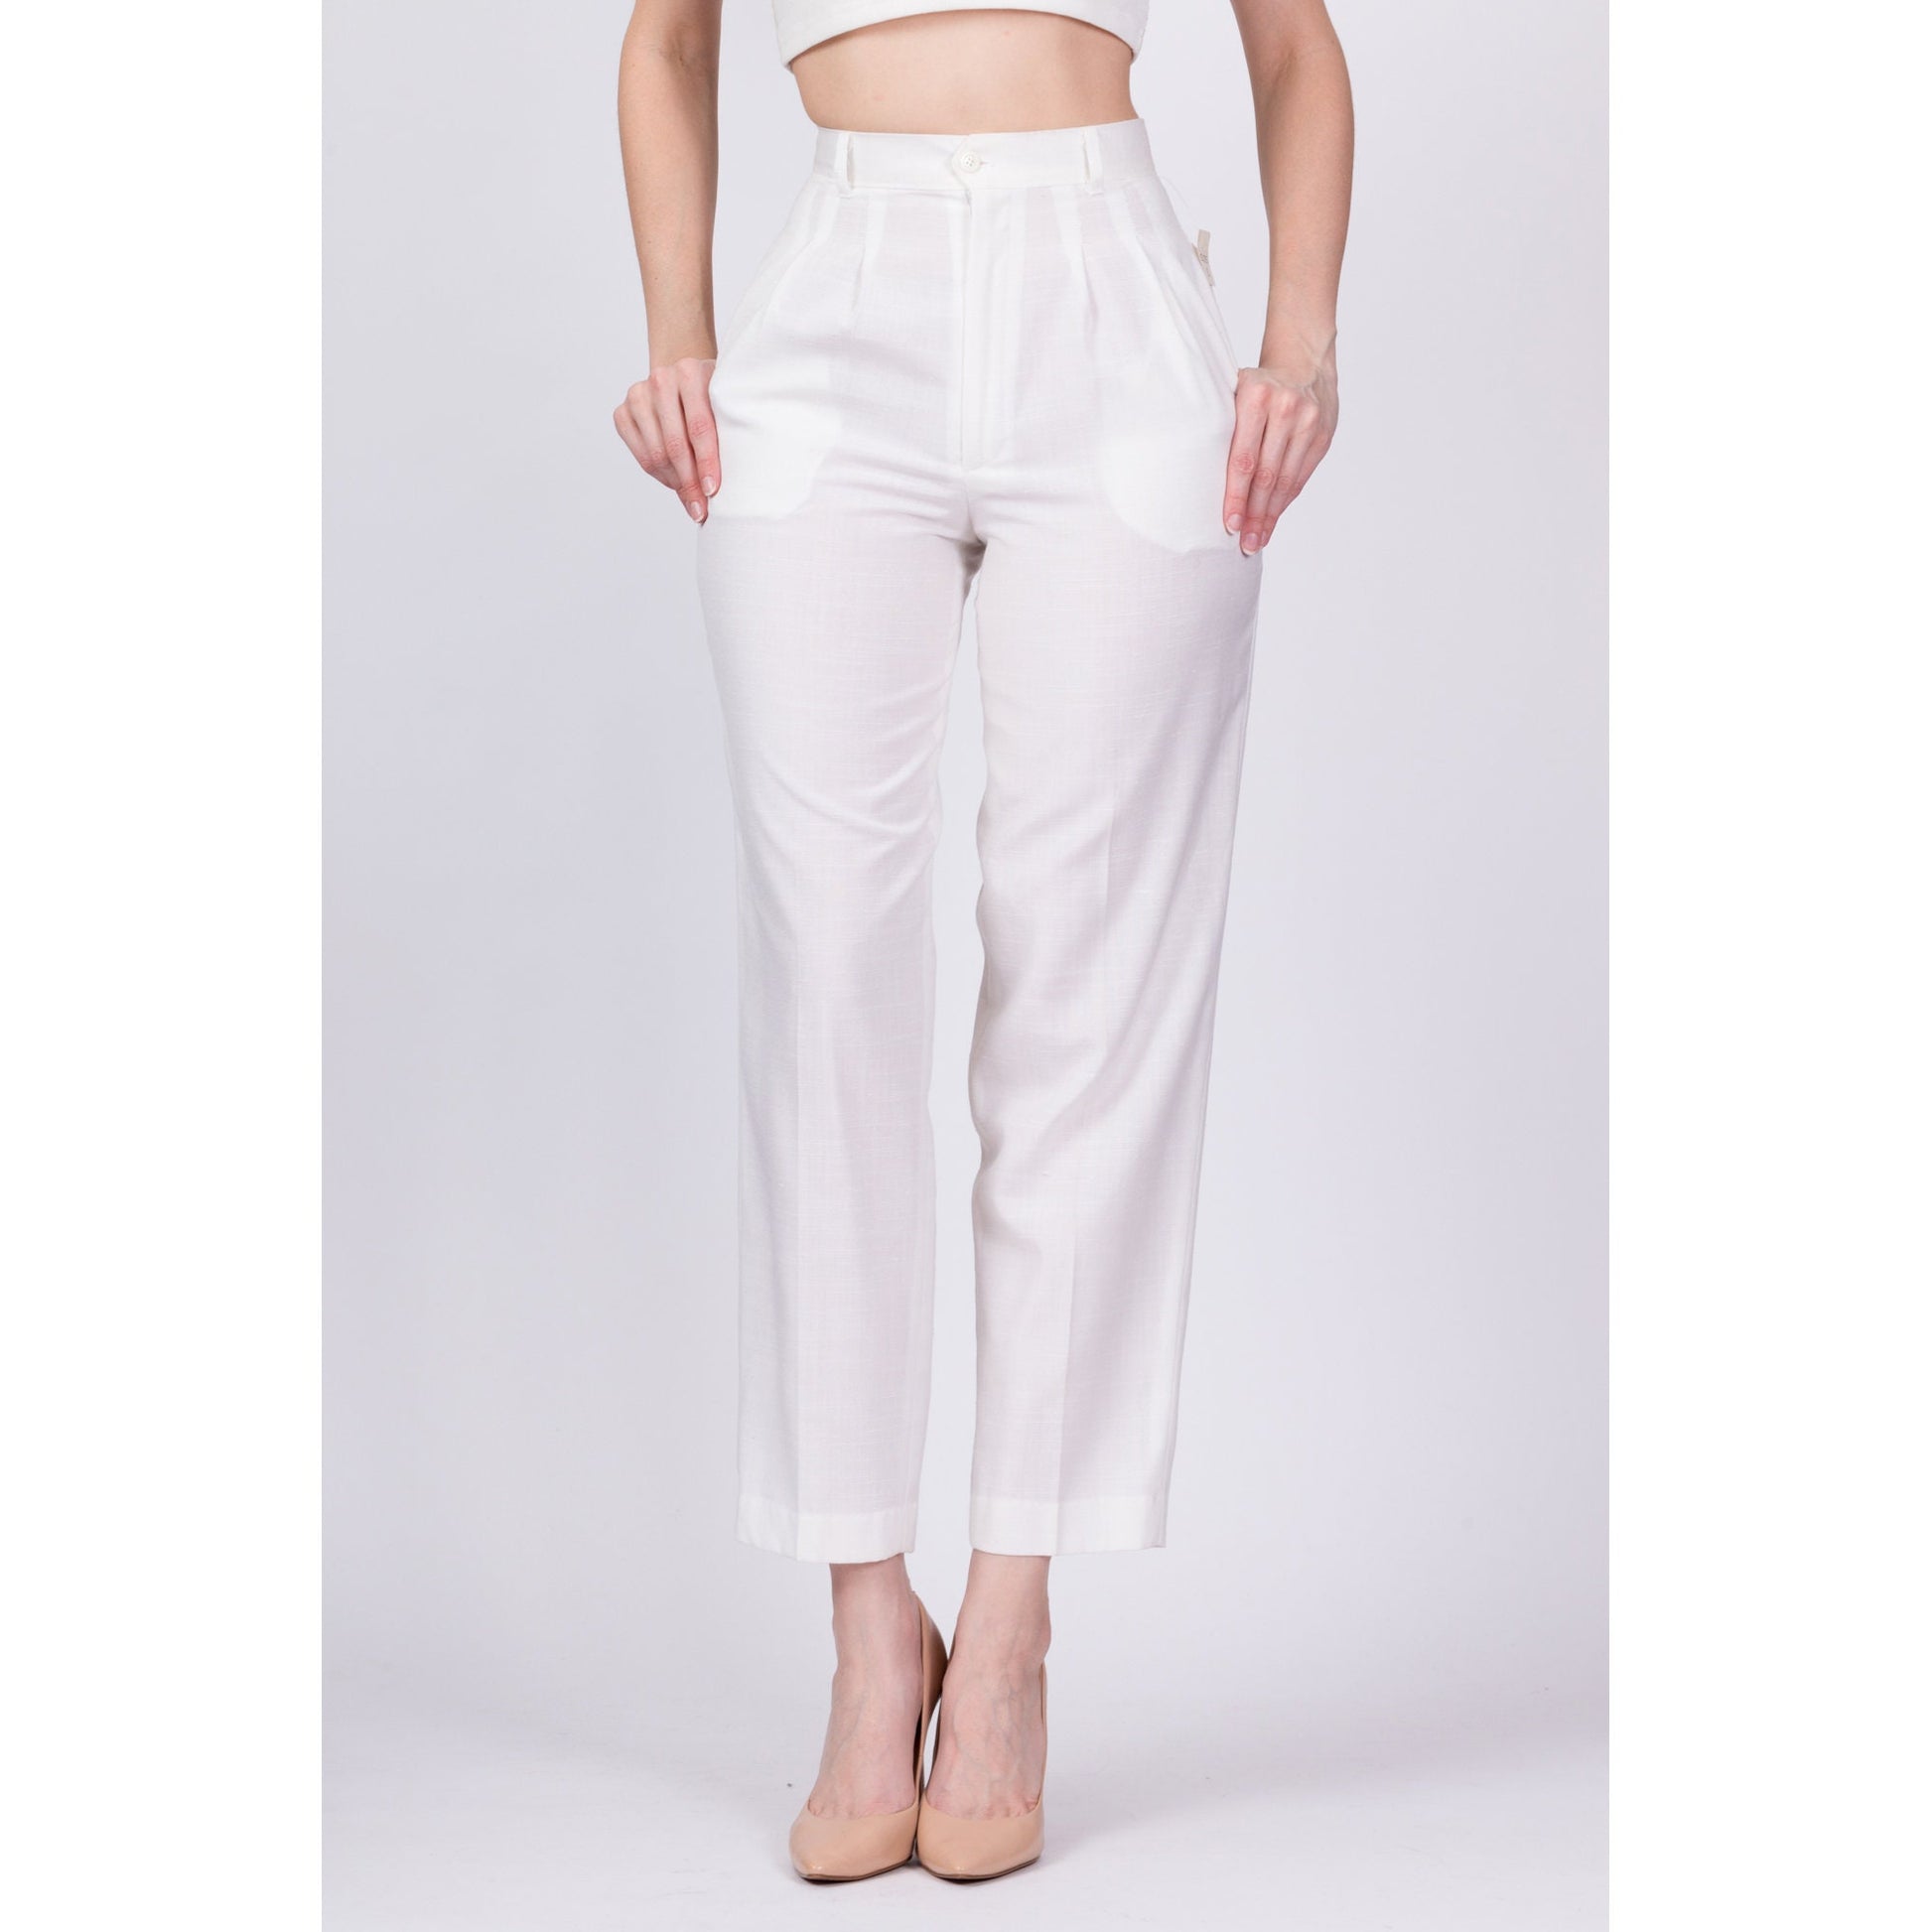 80s White High Waist Trousers - Extra Small, 24" 